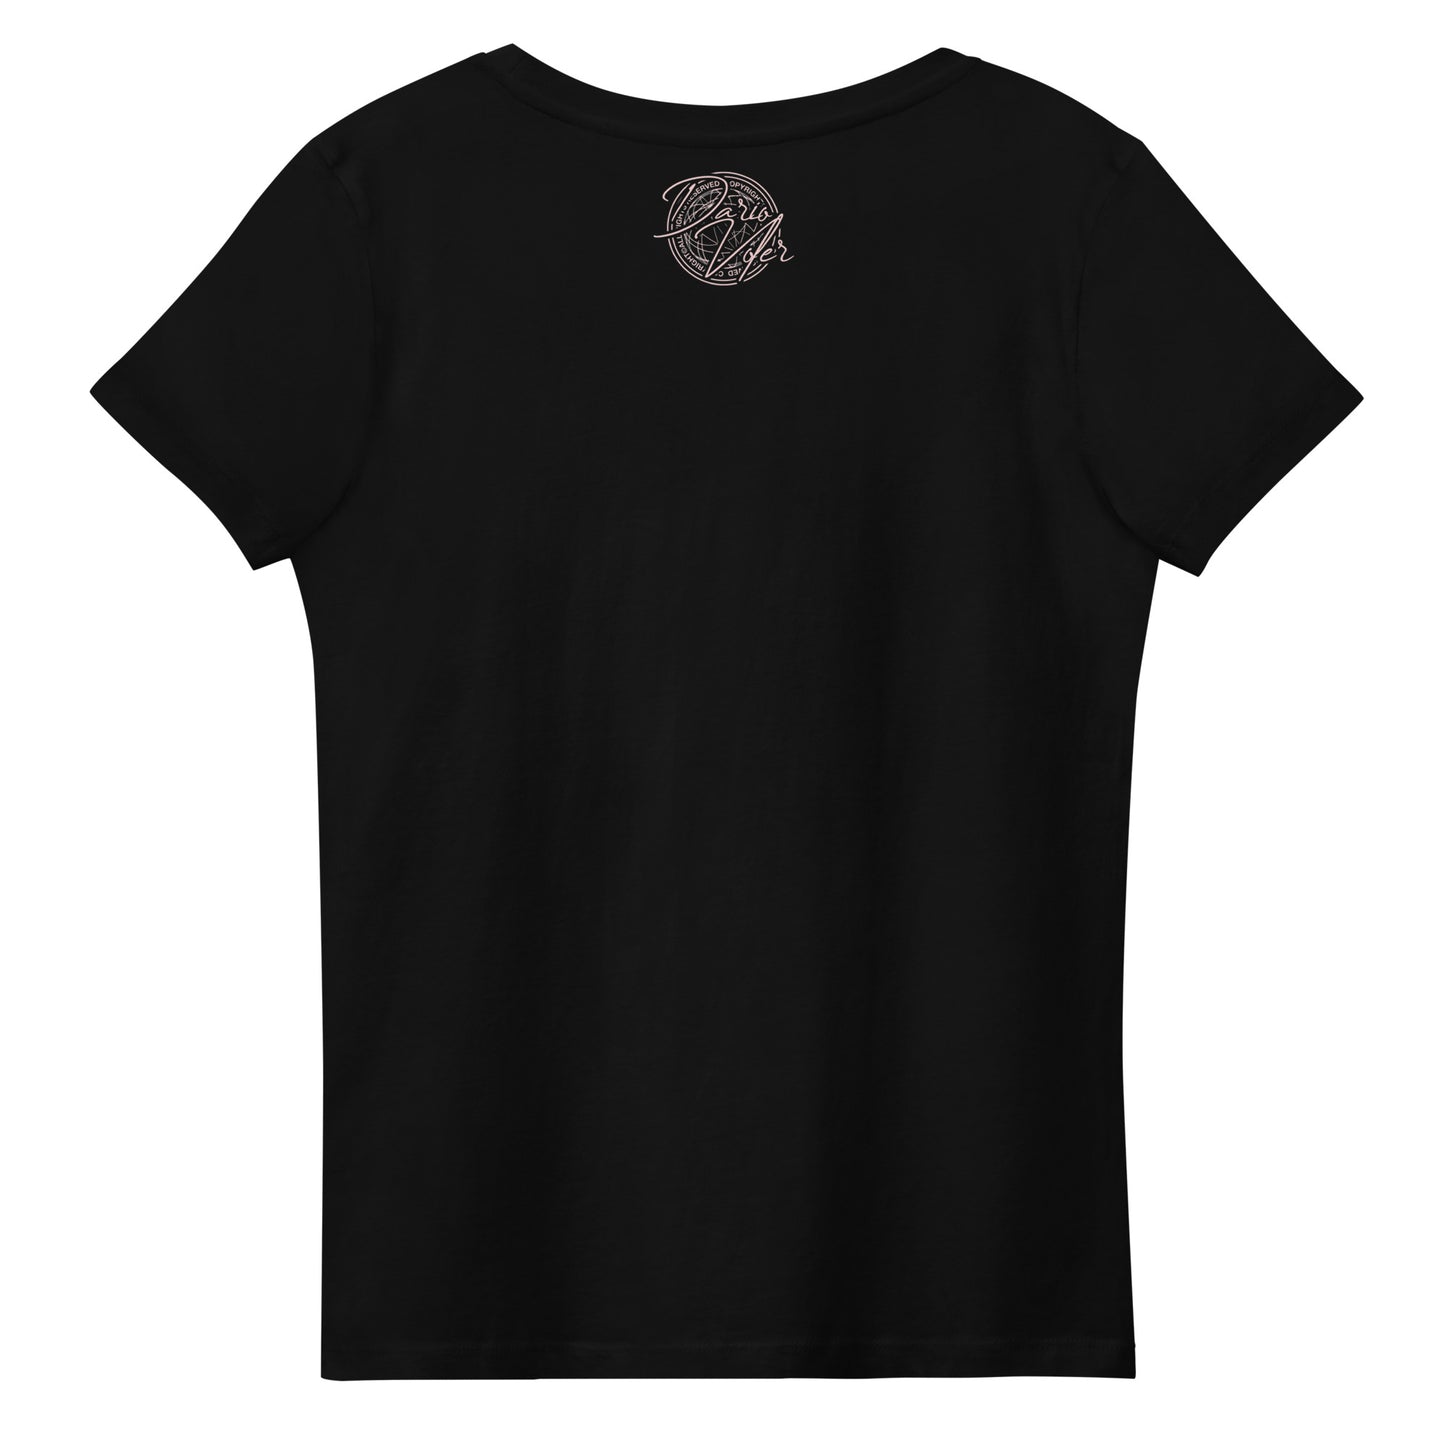 Women's Hustle Passion fitted tee